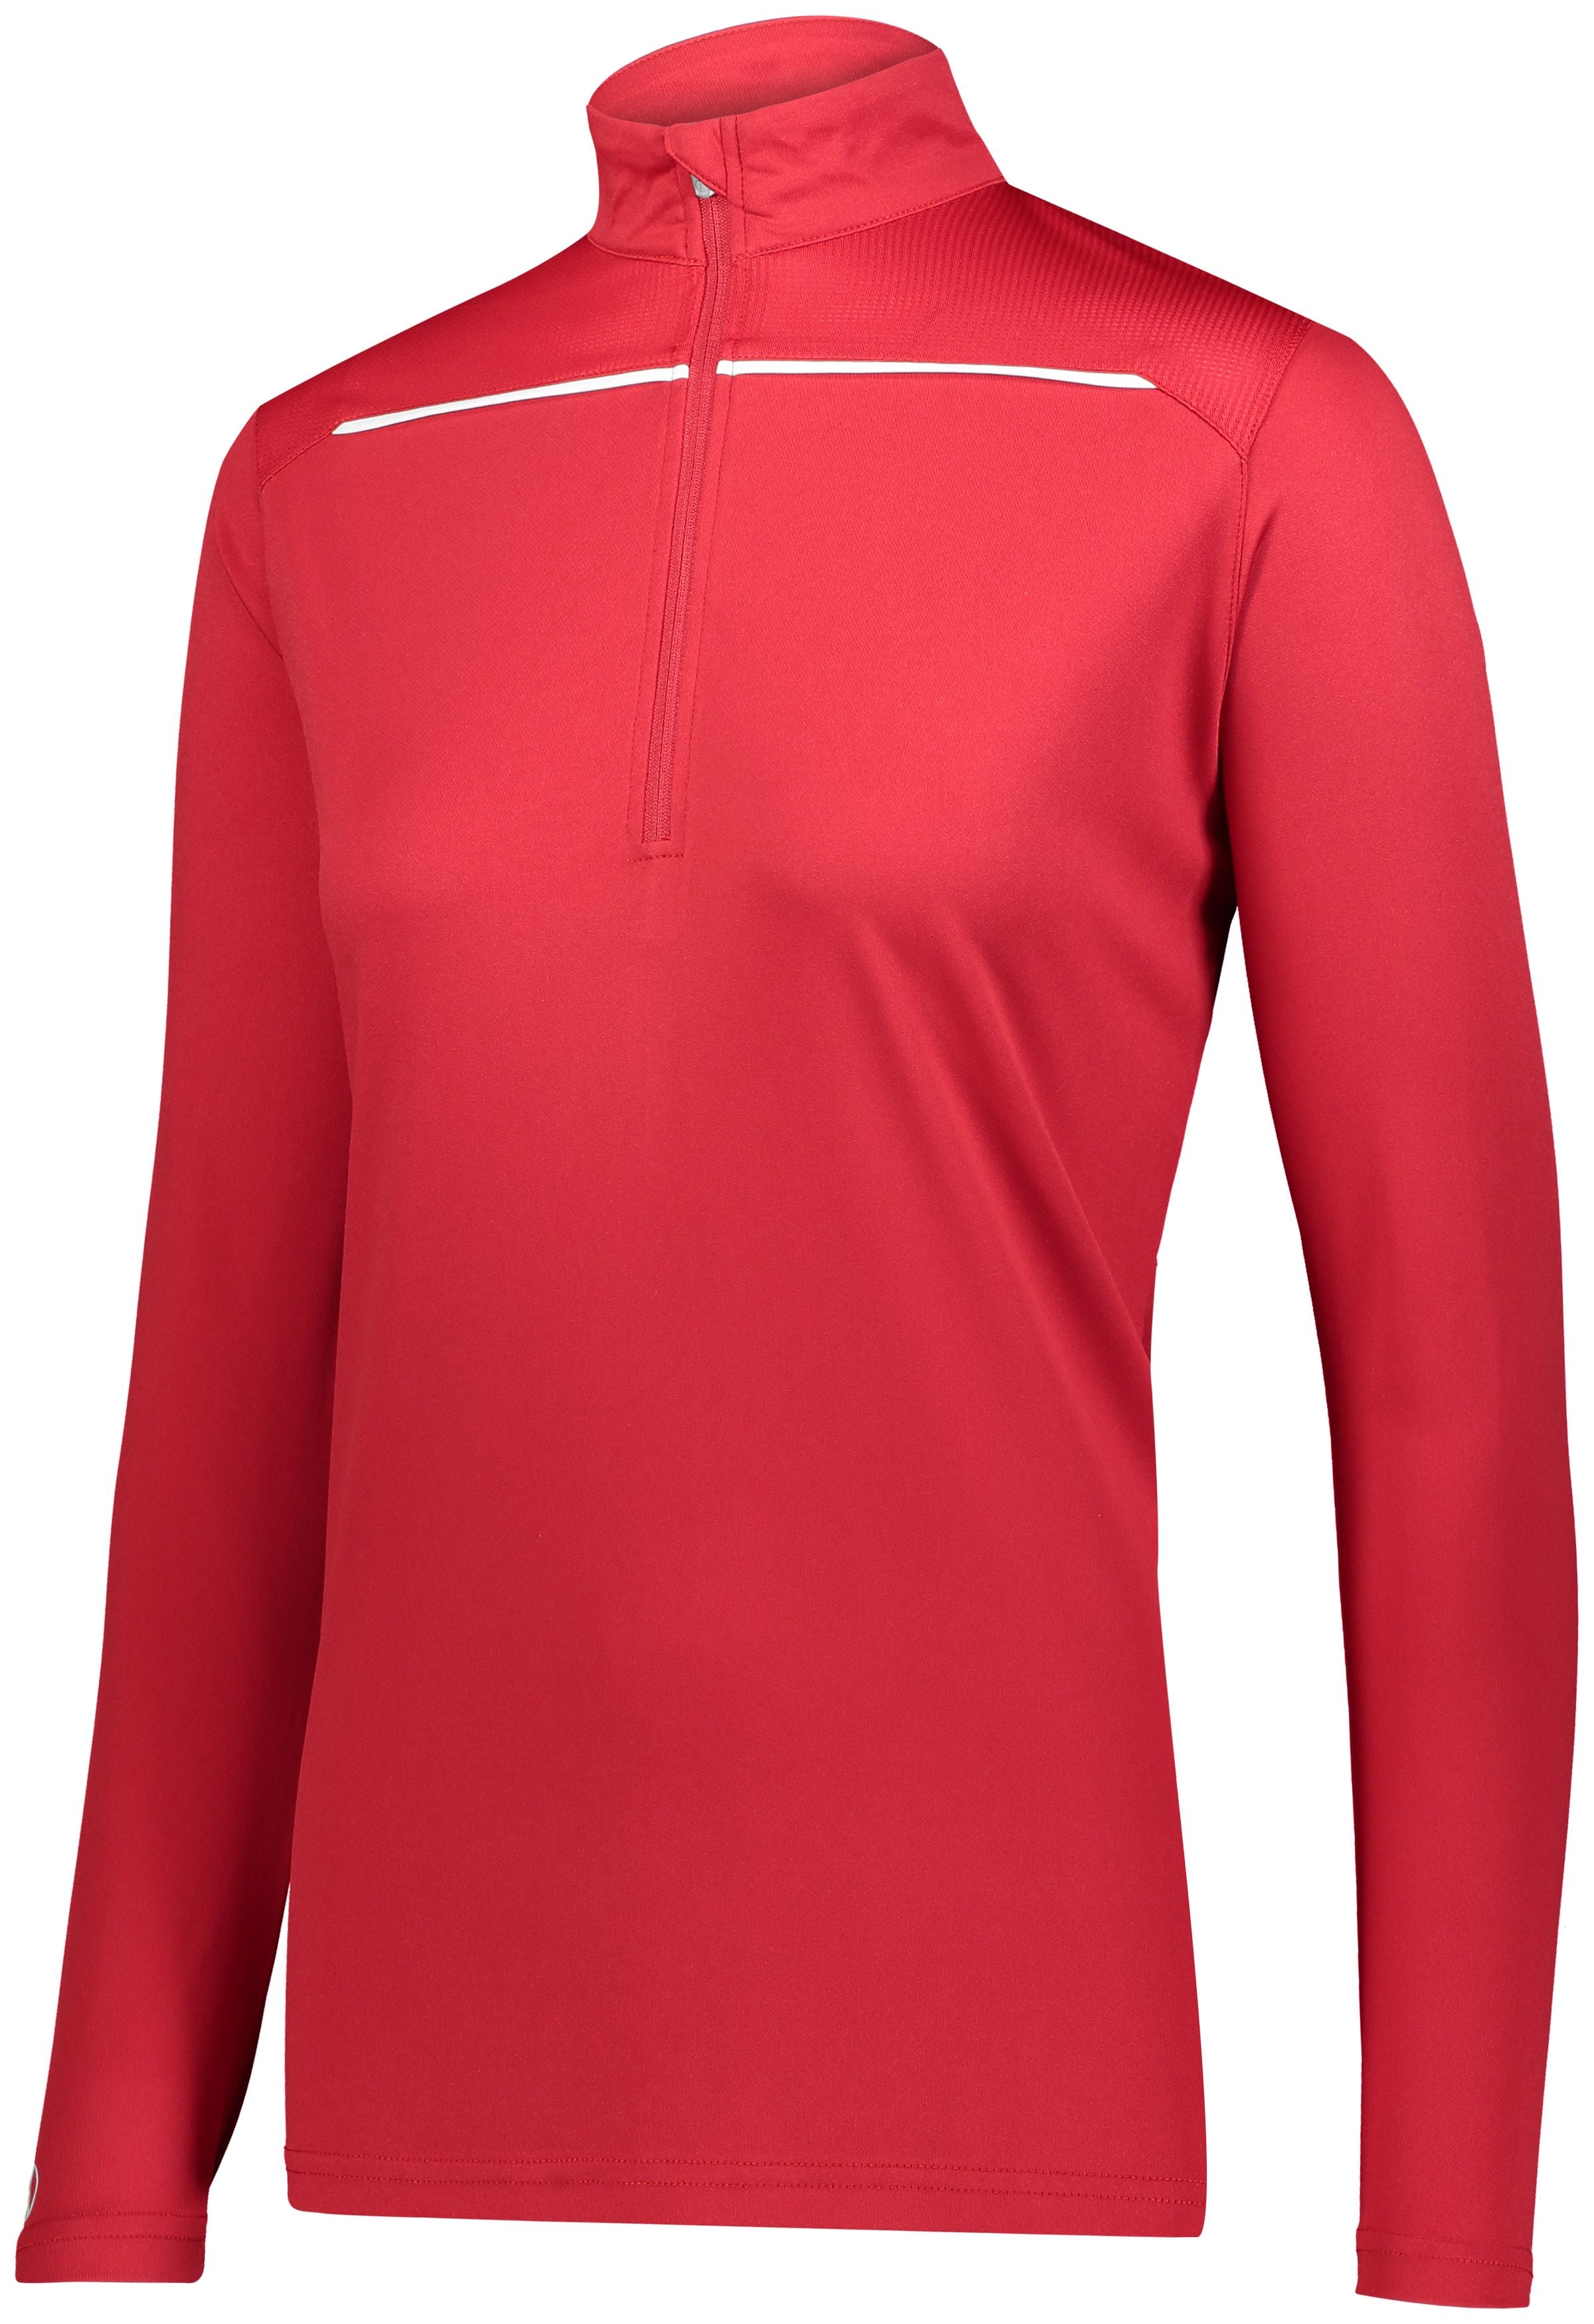 Holloway Ladies Defer Pullover in Scarlet/White  -Part of the Ladies, Ladies-Pullover, Holloway, Outerwear product lines at KanaleyCreations.com